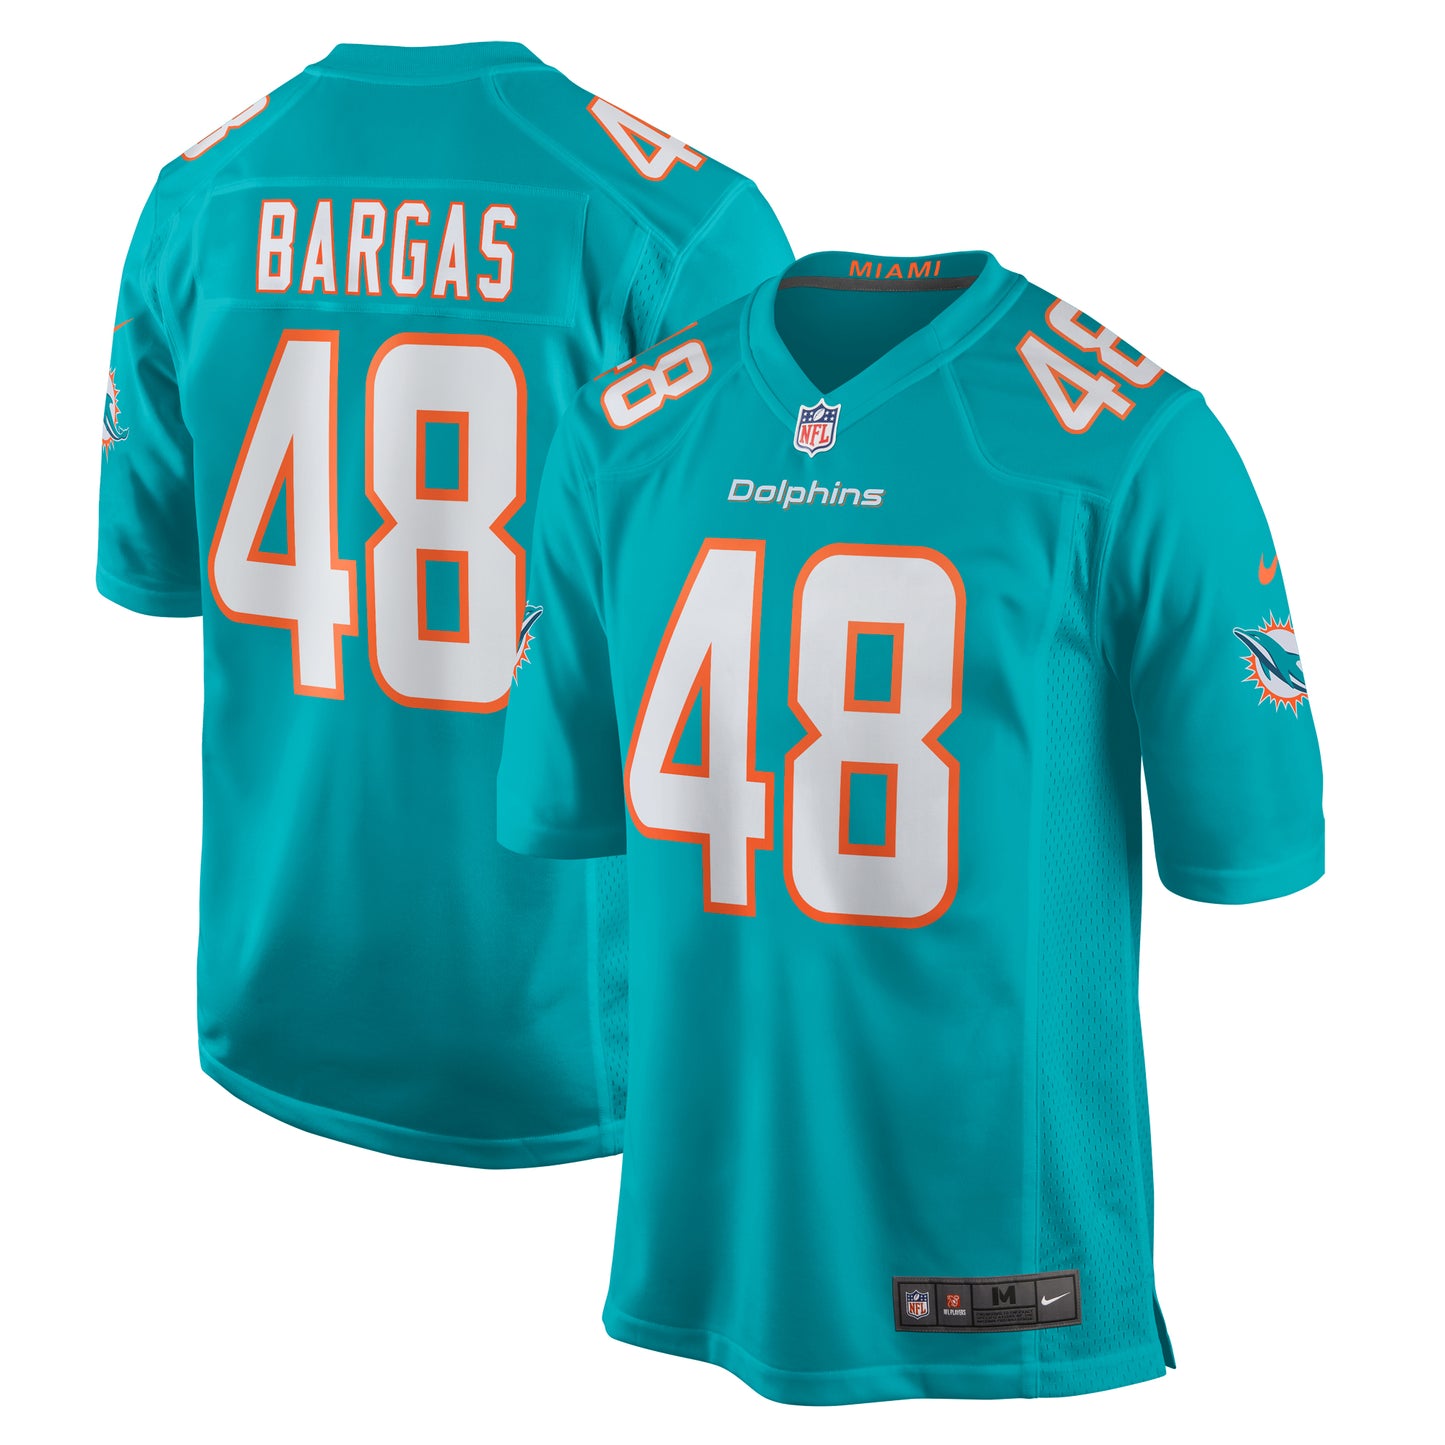 Jake Bargas Miami Dolphins Nike Home Game Player Jersey - Aqua